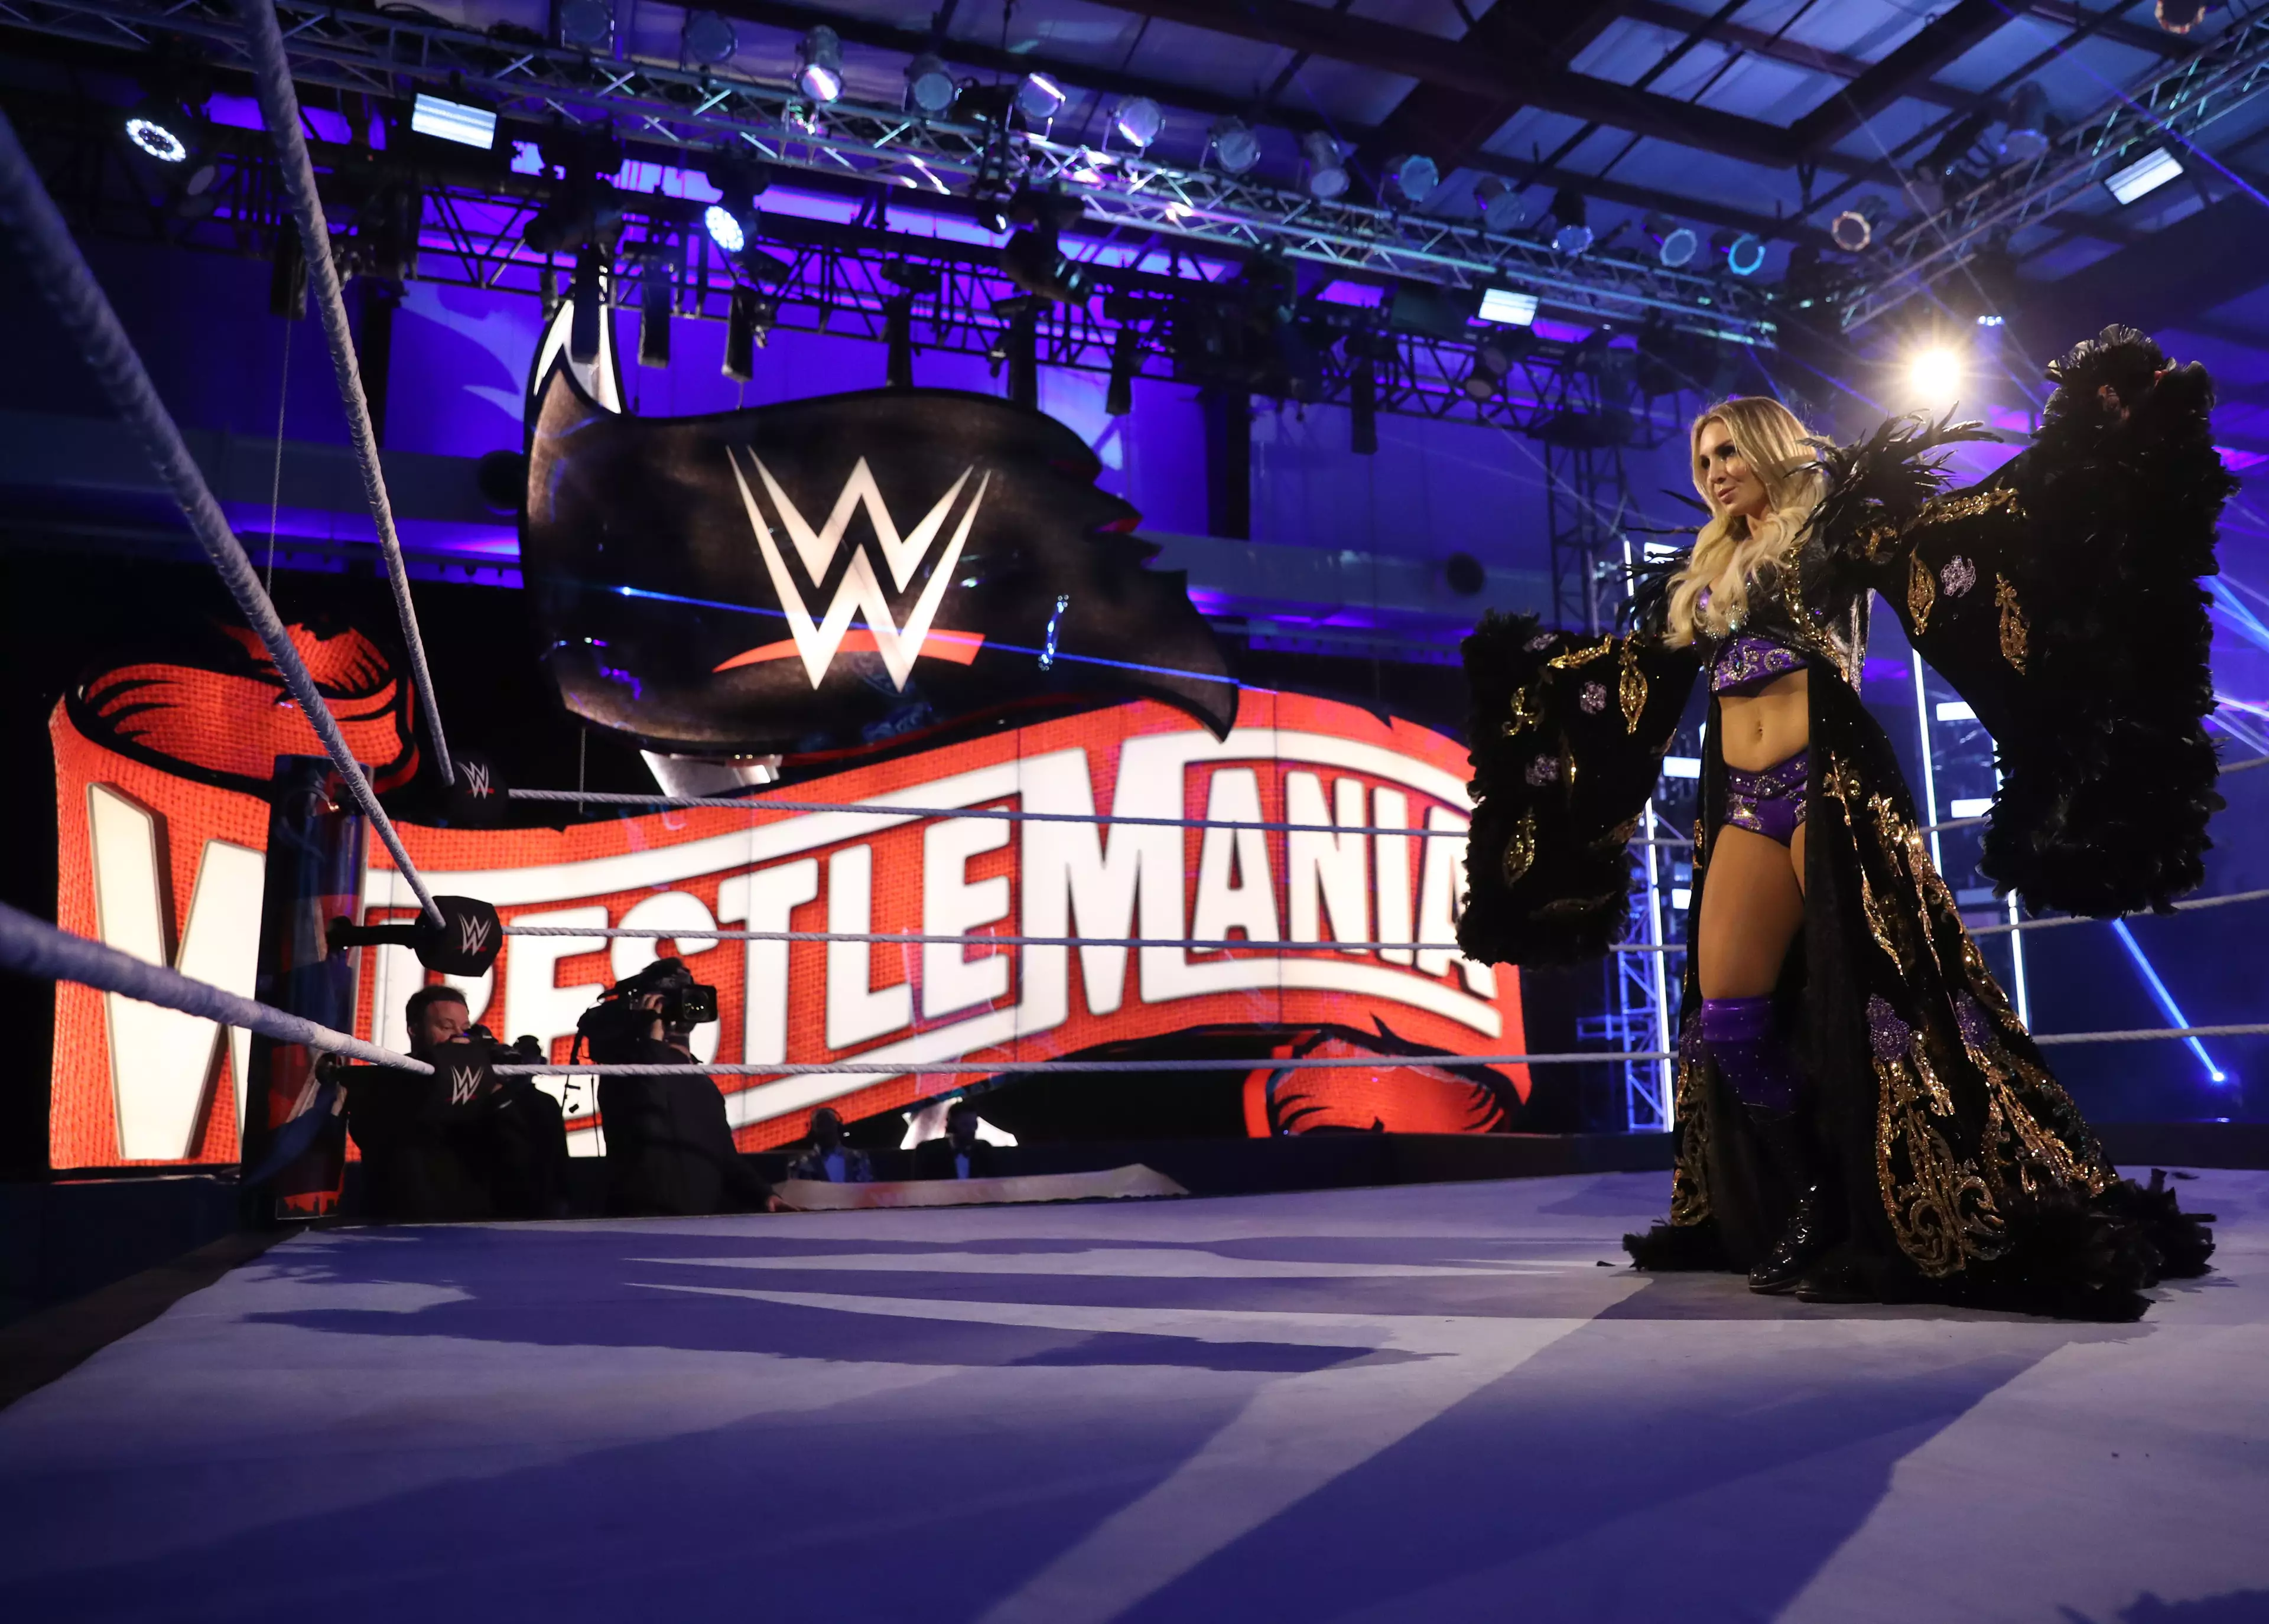 WWE have taped a variety of shows over the last month, including WrestleMania 36. (Image